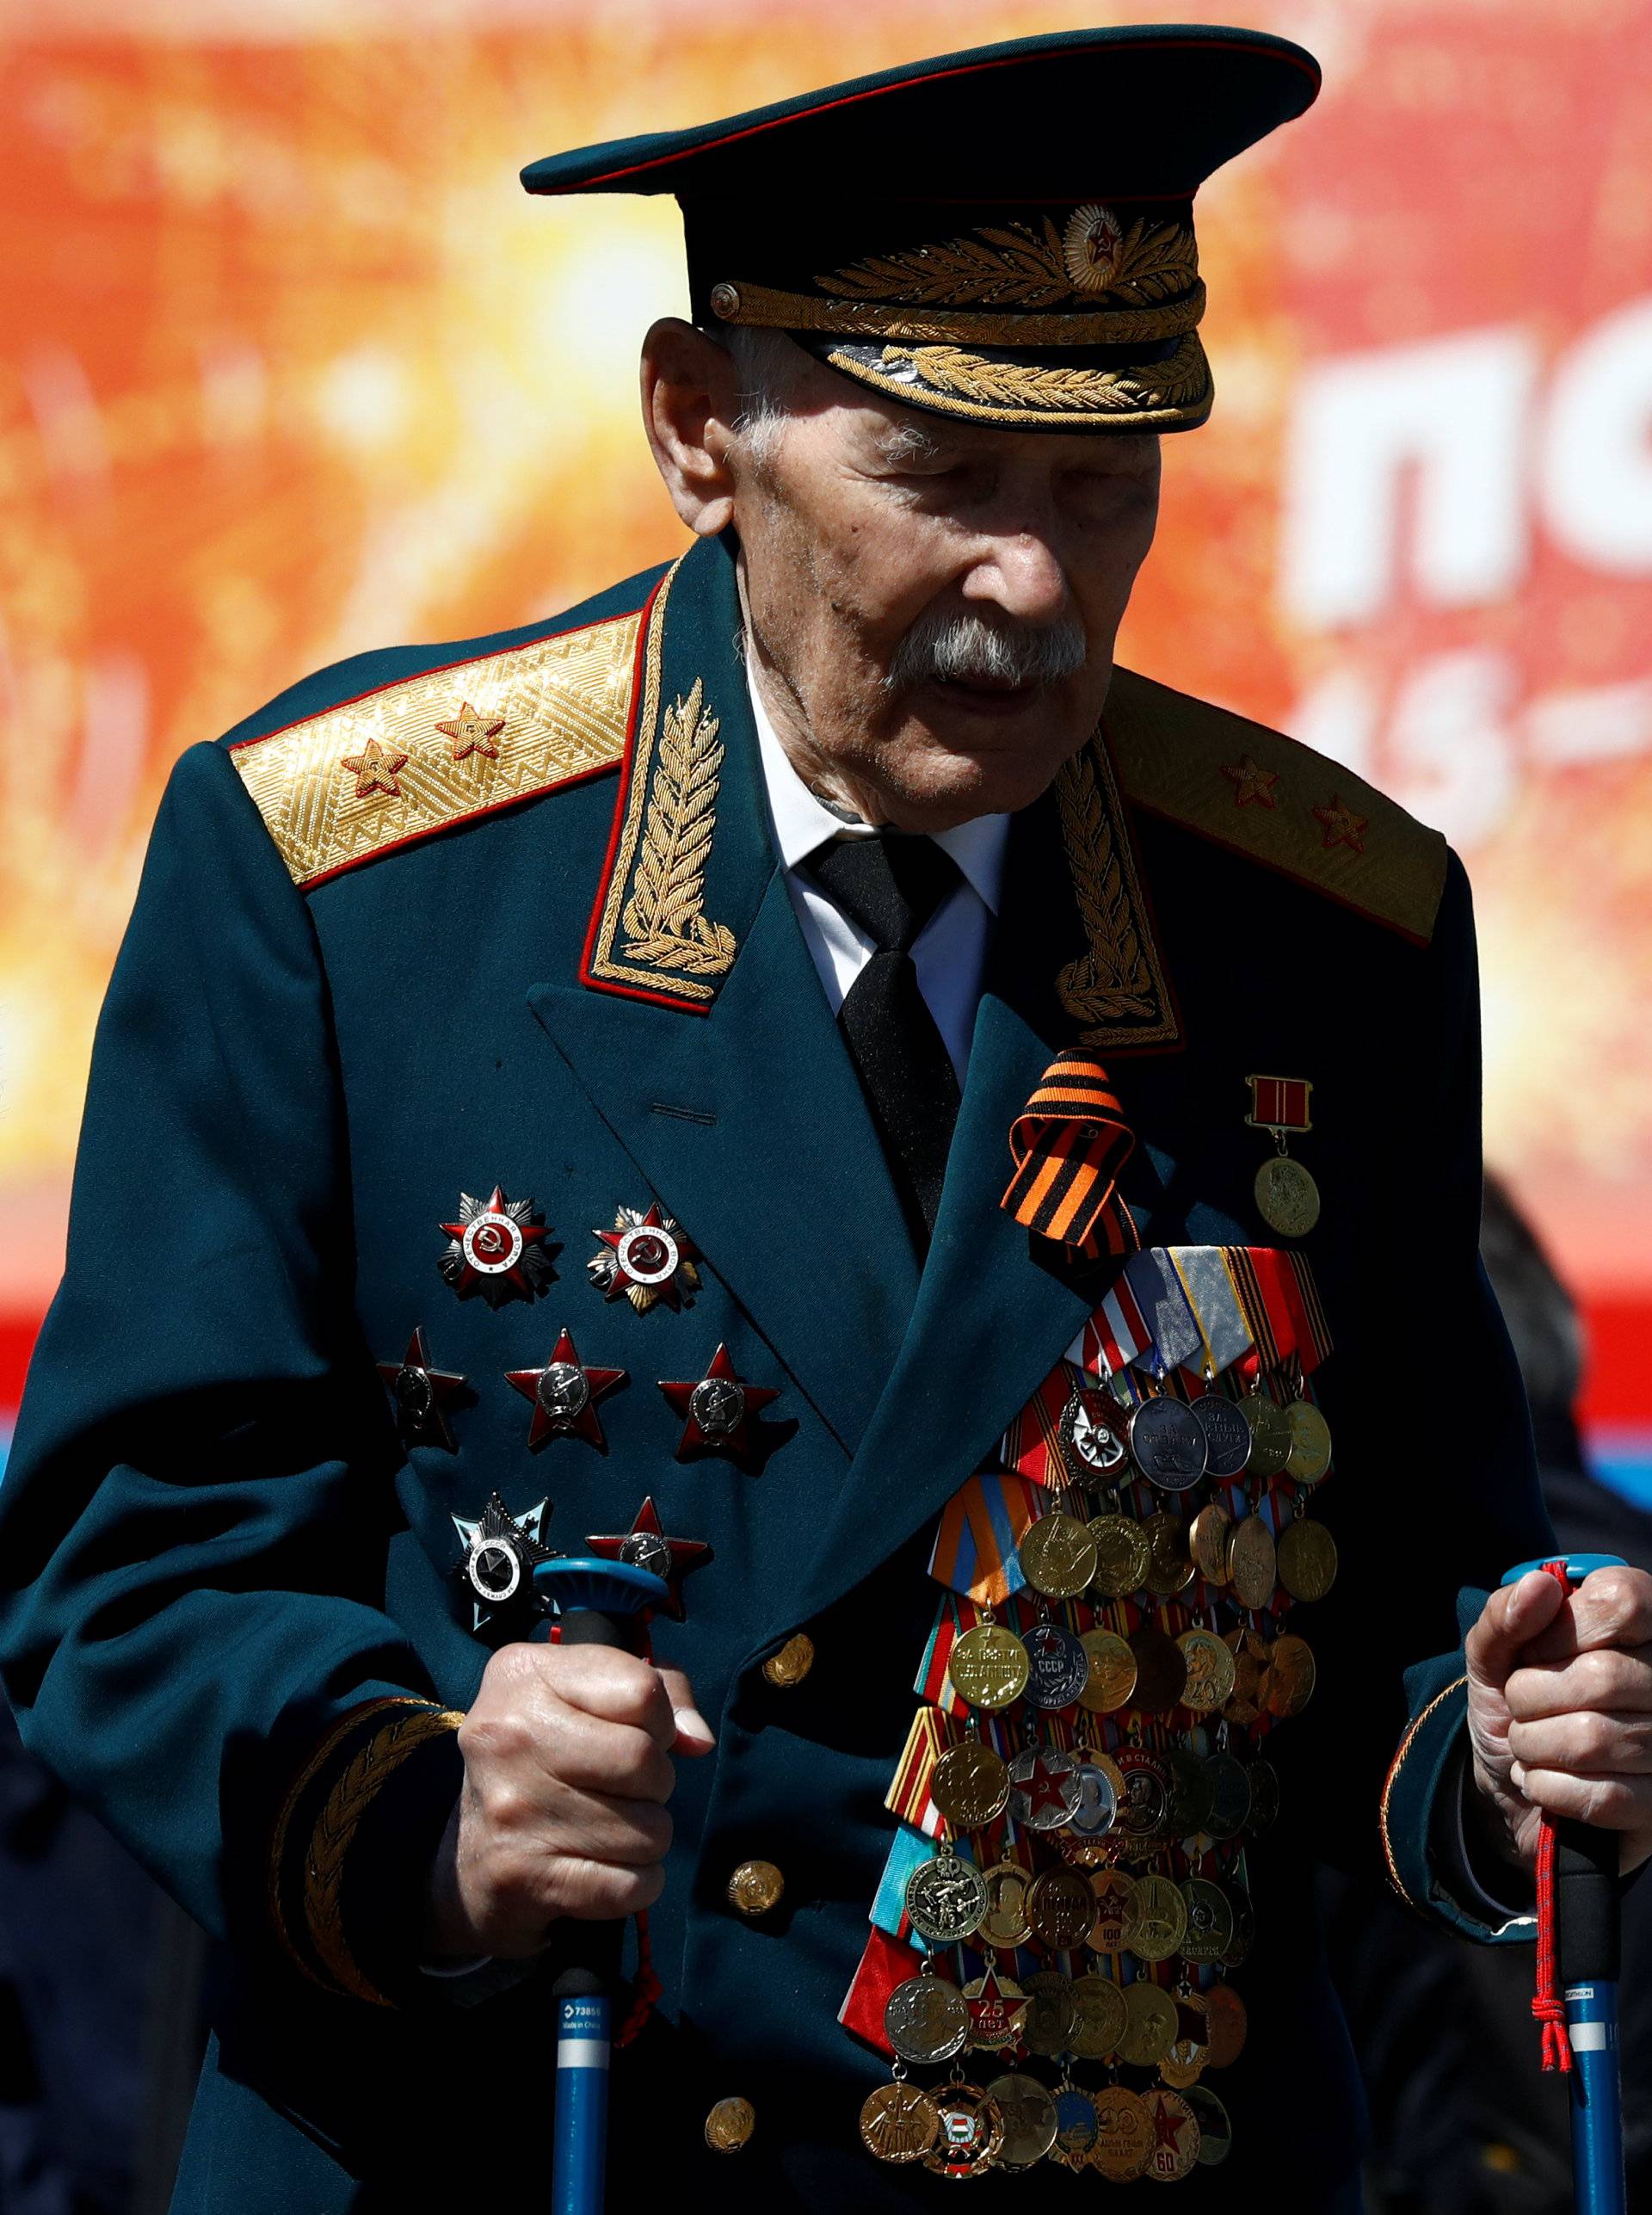 A veteran walks following the Victory Day parade at Red Square in Moscow